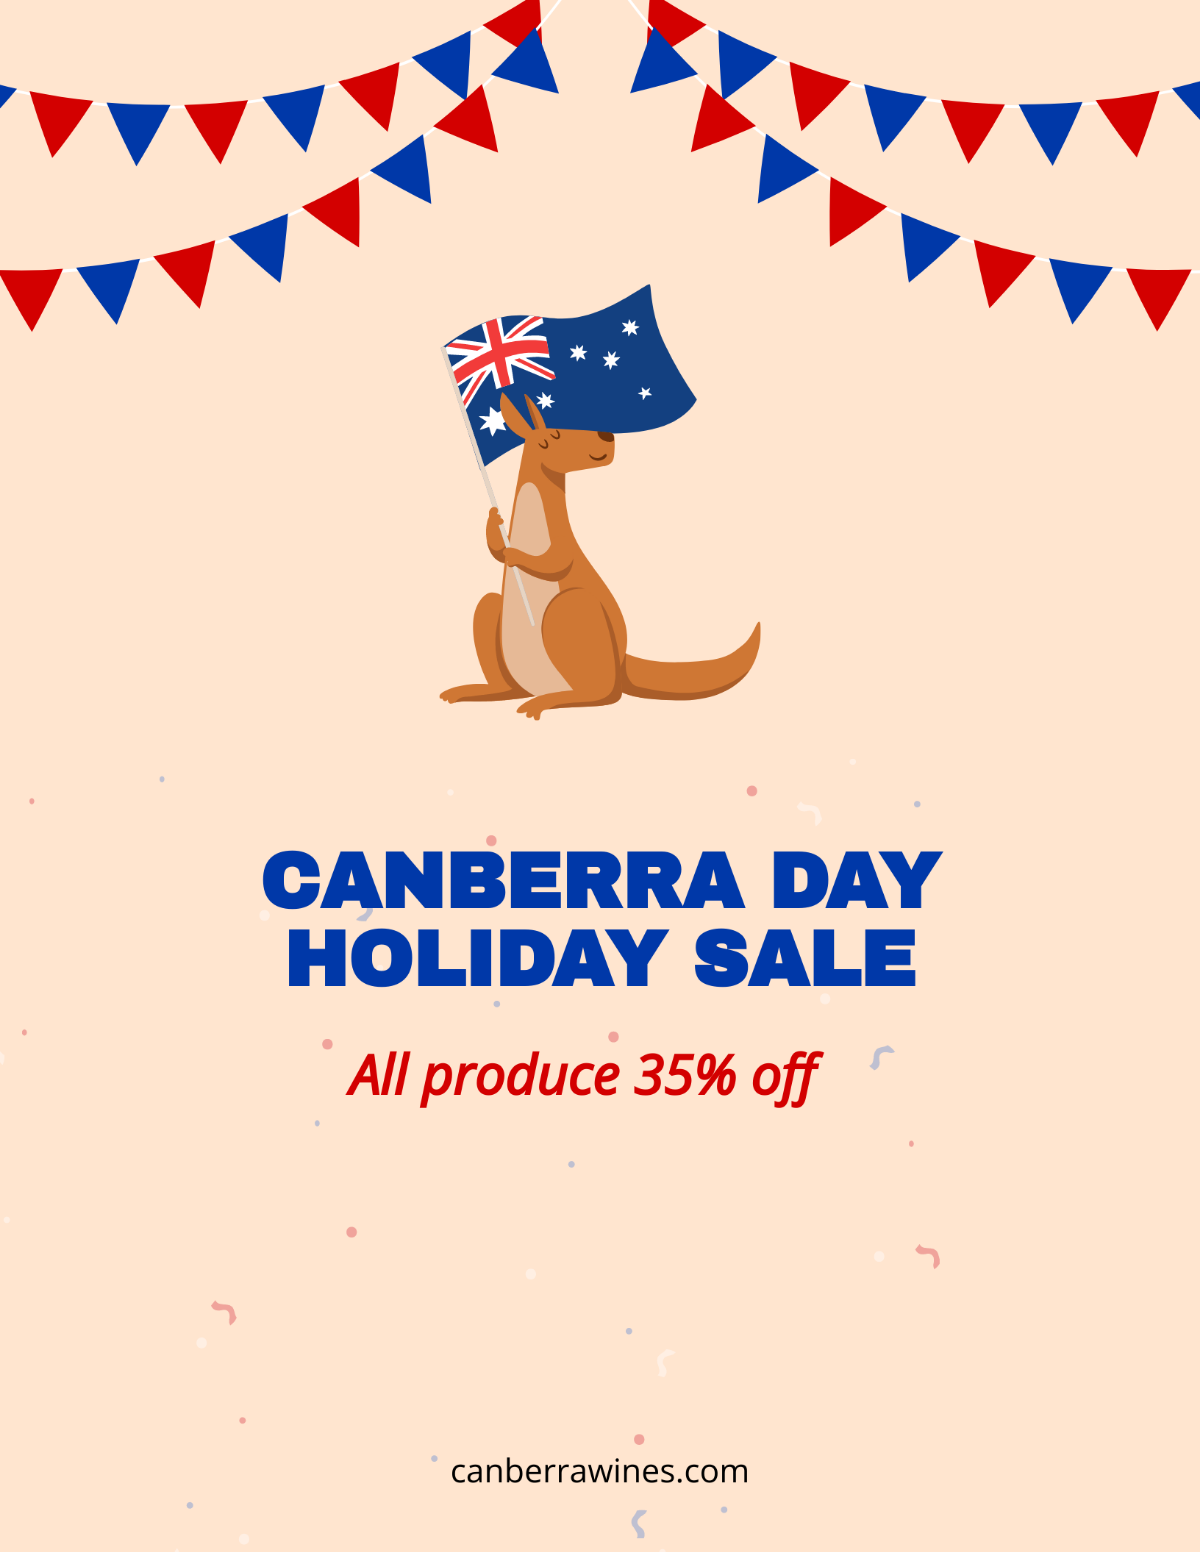 Canberra Day Flyer Background Template